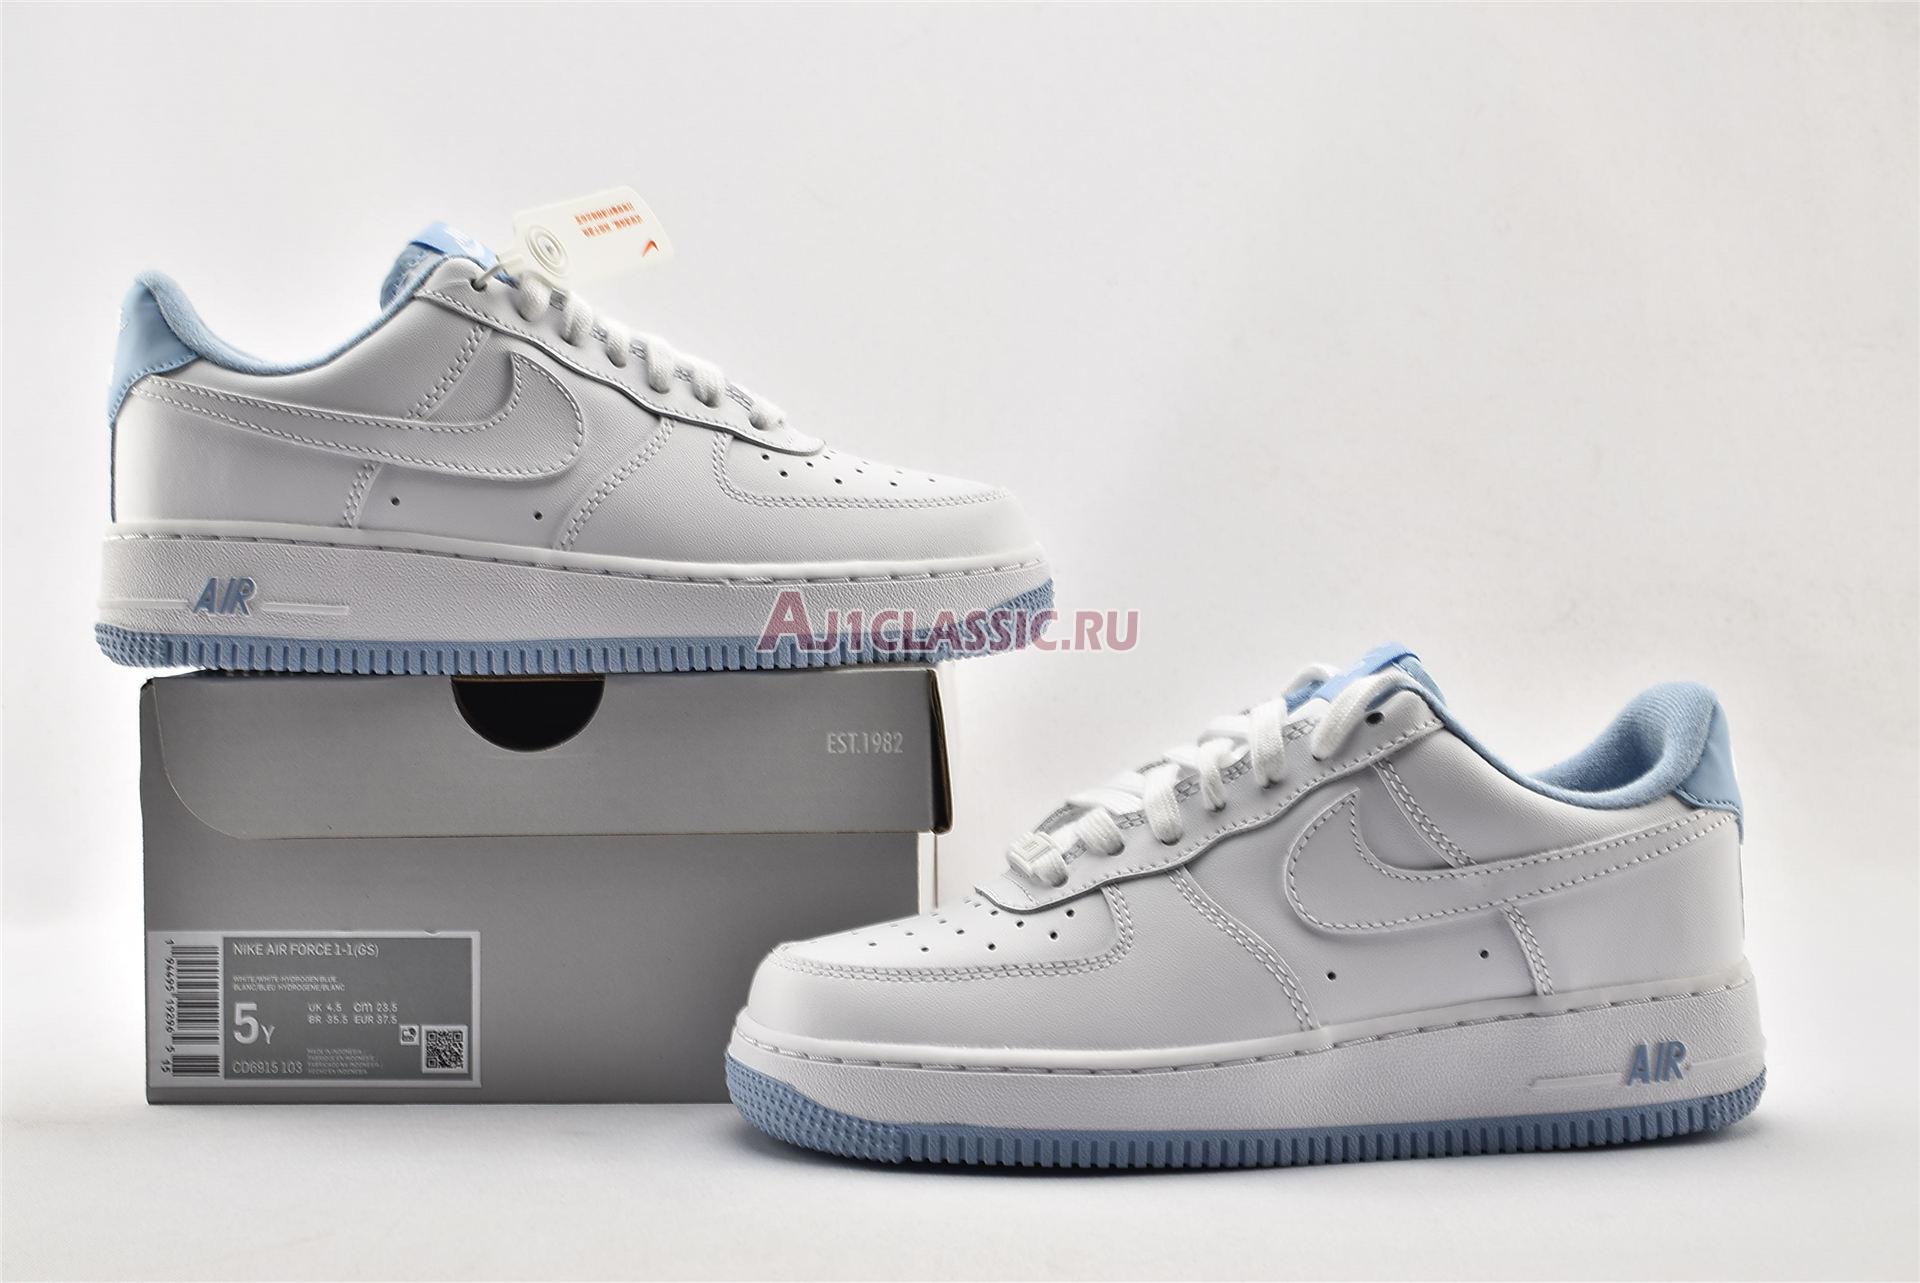 Nike Air Force 1 GS White Hydrogen Blue CD6915-103 White/White/Hydrogen Blue Sneakers